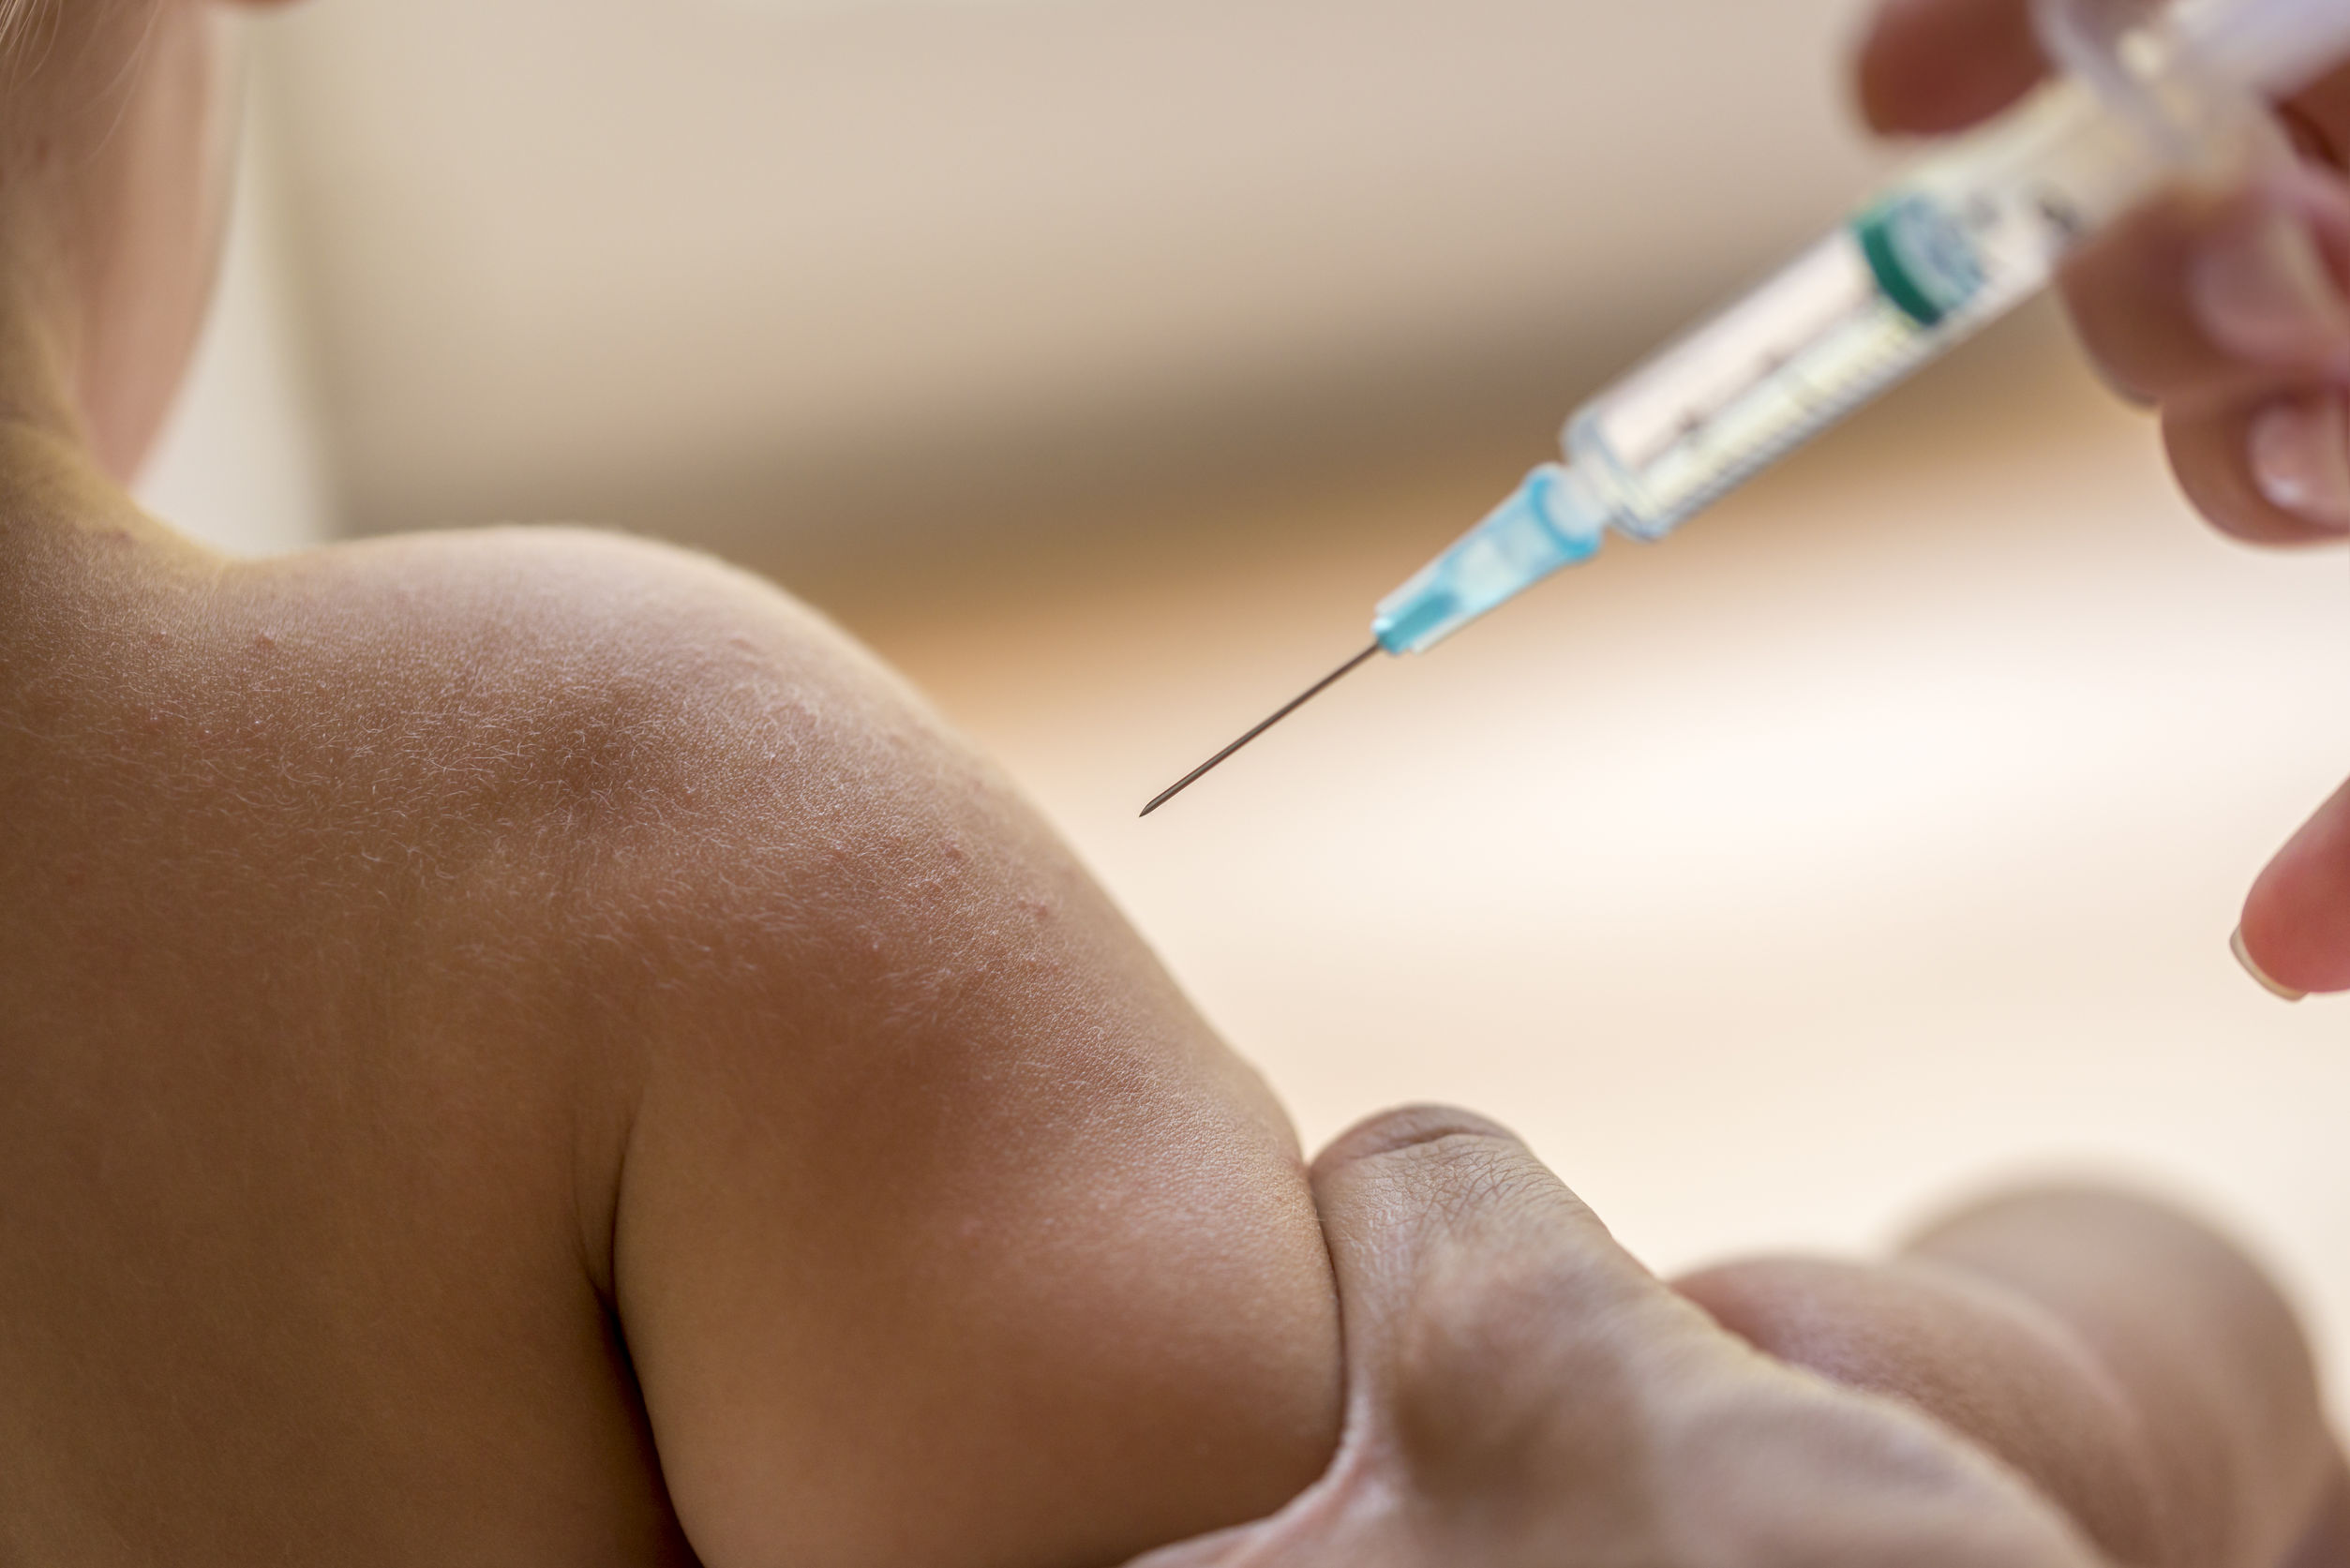 46180875 - doctor injecting a young child with a vaccination or antibiotic in a small disposable hypodermic syringe, close up of the kids arm and needle.